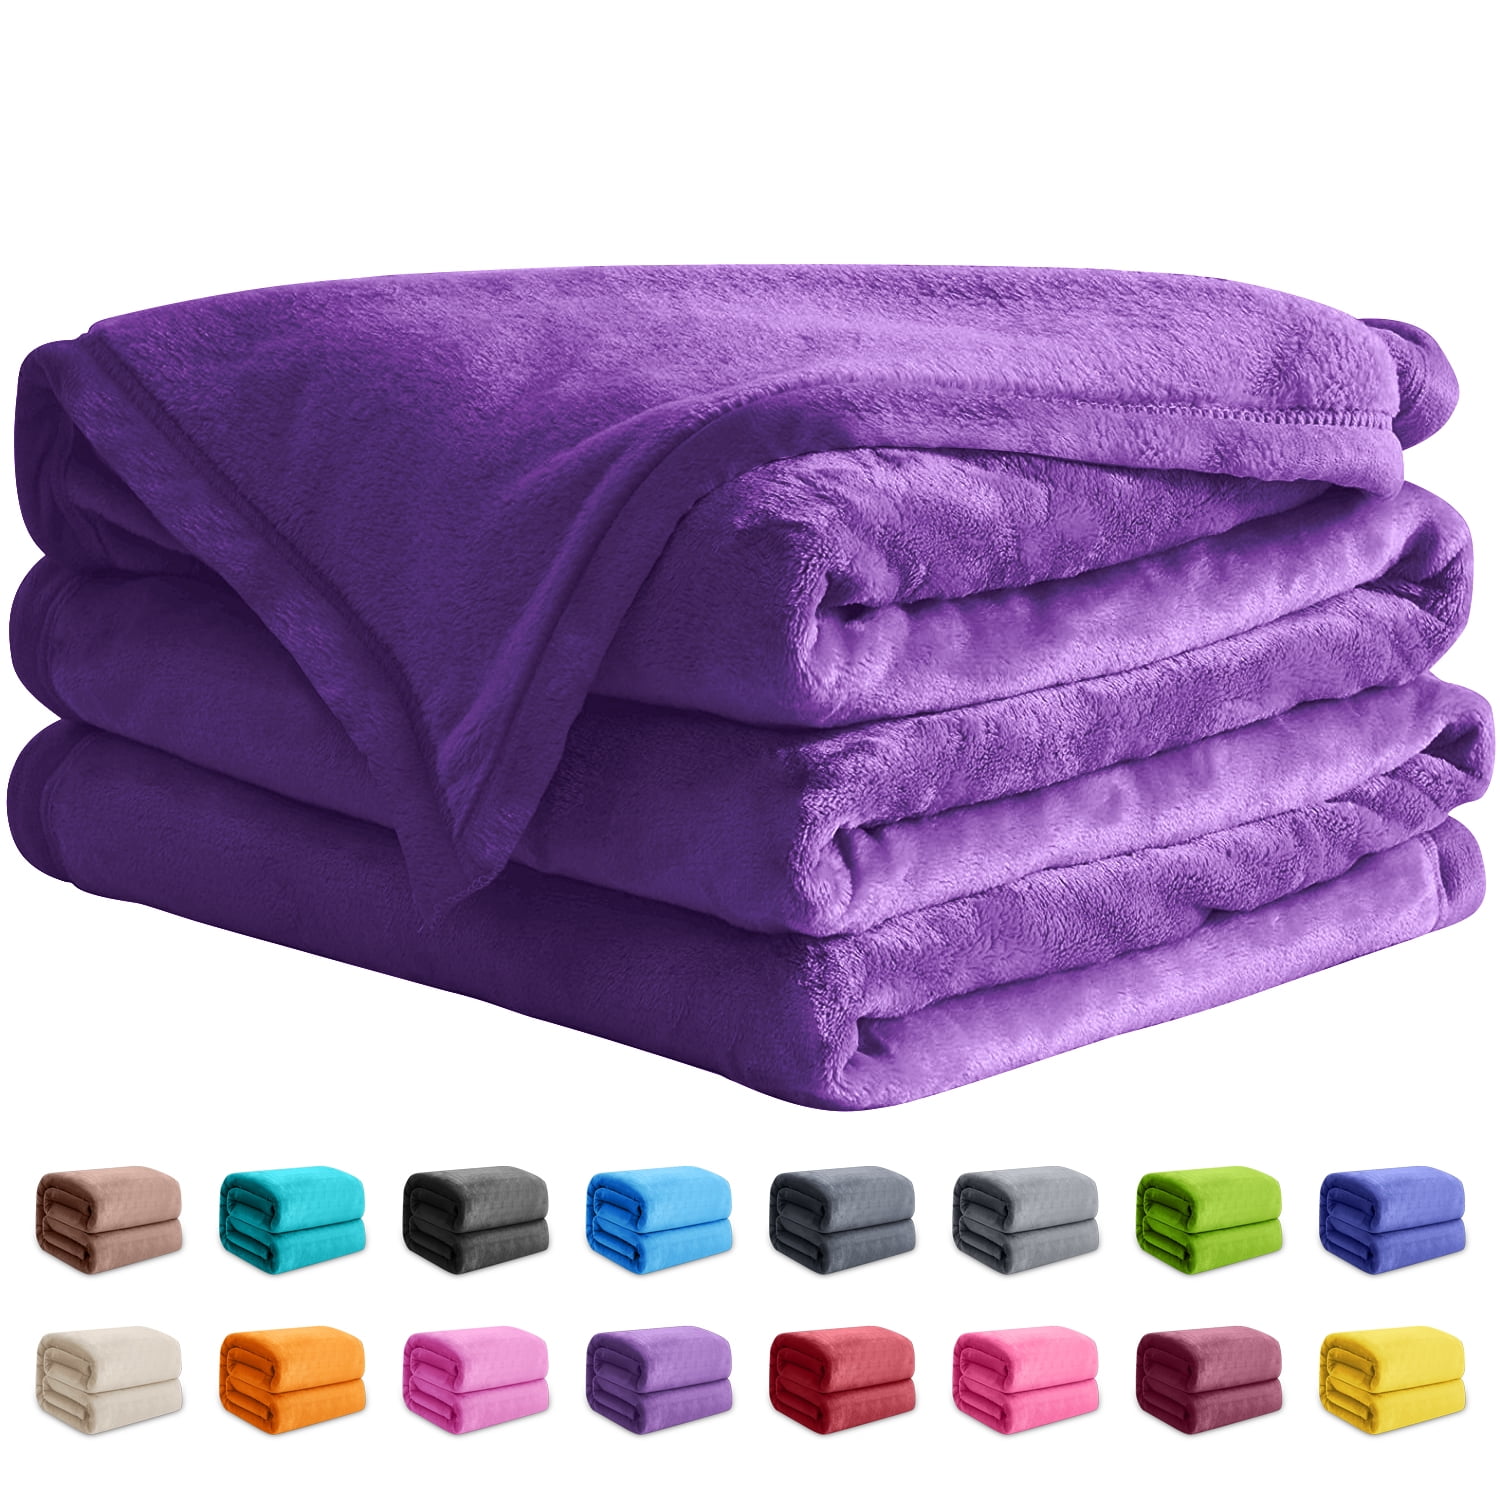 Astarin Throw Blanket, King Size Purple Blankets & Throws for Couch ...